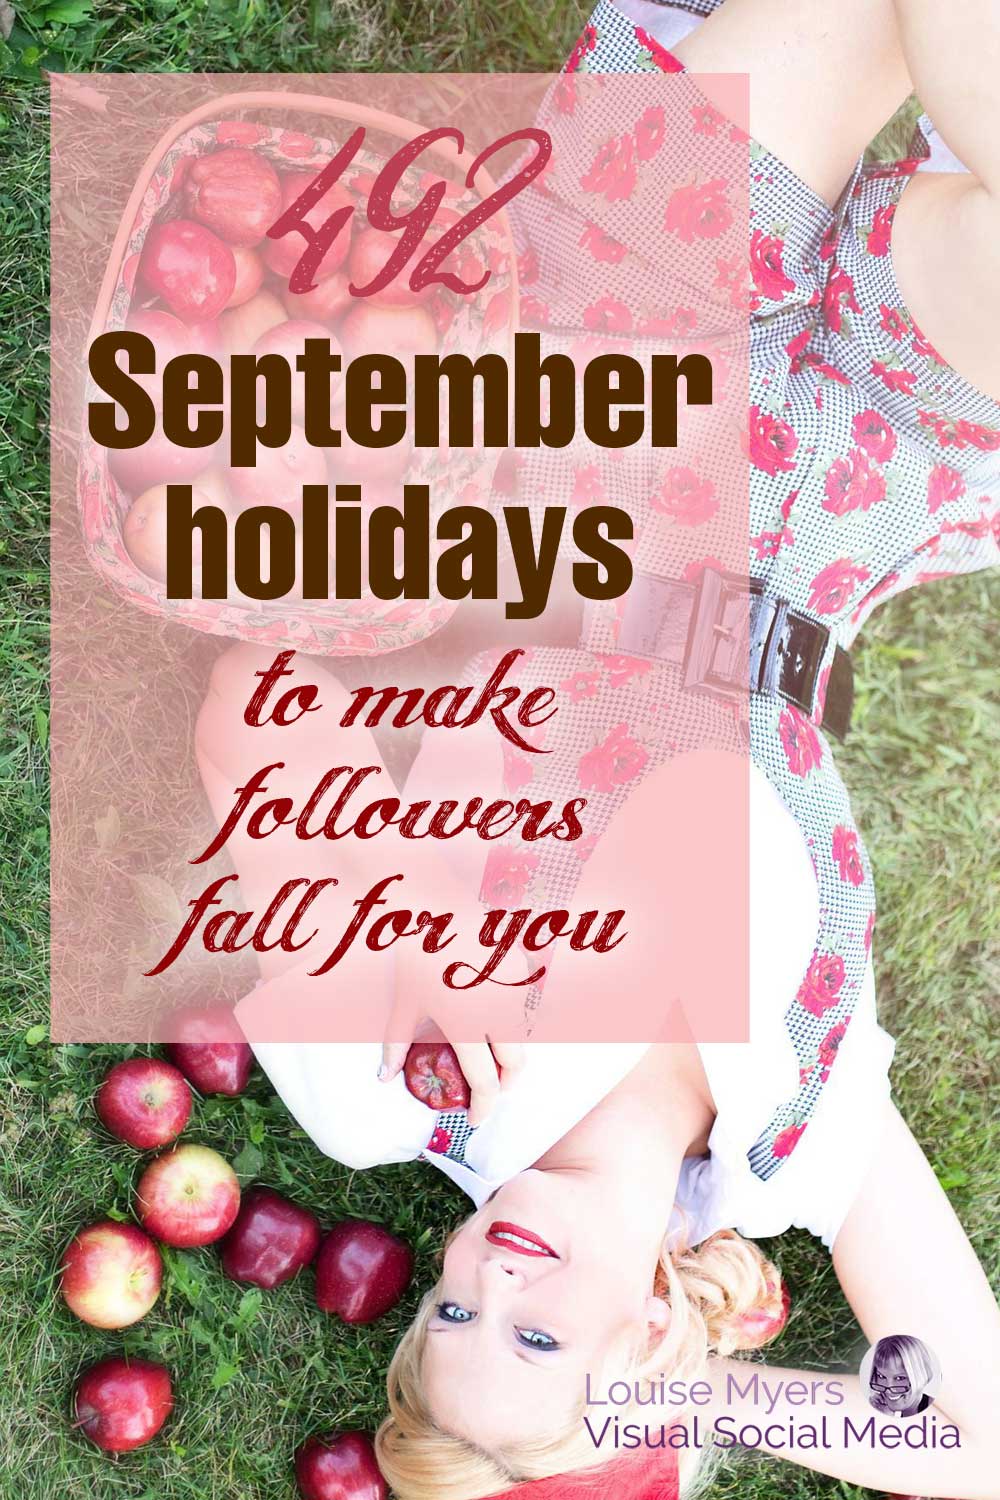 woman in shorts and t shirt lying on grass with apples and basket has text 492 september holidays to make your followers fall for you.